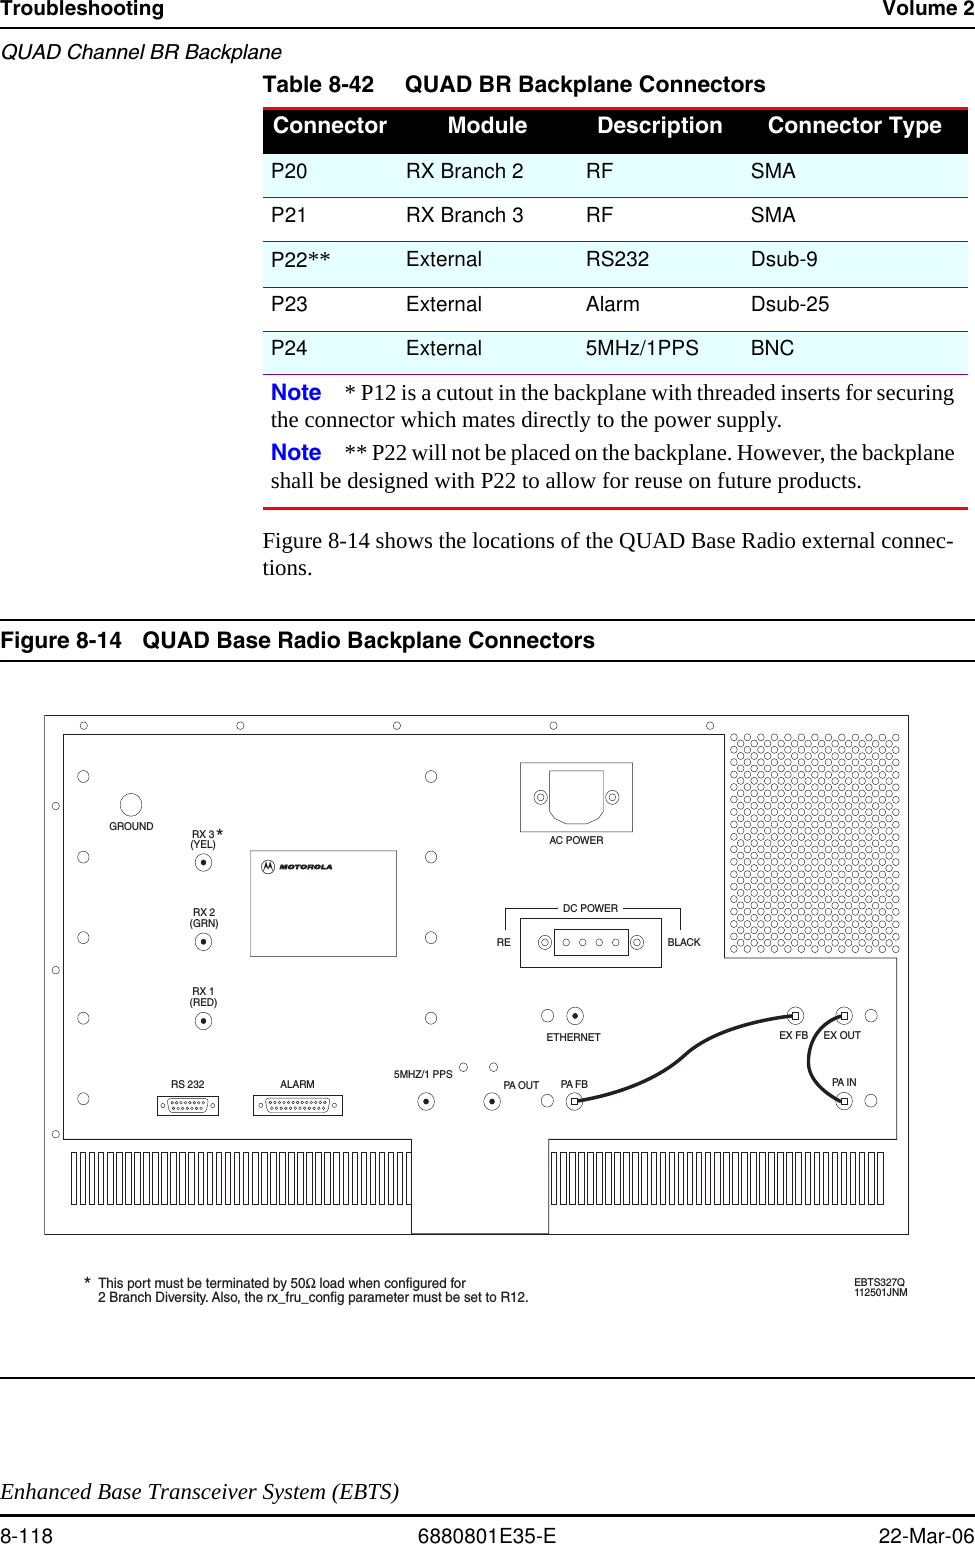 Troubleshooting Volume 2QUAD Channel BR BackplaneEnhanced Base Transceiver System (EBTS)8-118 6880801E35-E 22-Mar-06Figure 8-14 shows the locations of the QUAD Base Radio external connec-tions.Figure 8-14 QUAD Base Radio Backplane Connectors P20 RX Branch 2 RF SMAP21 RX Branch 3 RF SMAP22** External RS232 Dsub-9P23 External Alarm Dsub-25P24 External 5MHz/1PPS BNCNote * P12 is a cutout in the backplane with threaded inserts for securing the connector which mates directly to the power supply. Note ** P22 will not be placed on the backplane. However, the backplane shall be designed with P22 to allow for reuse on future products.Table 8-42 QUAD BR Backplane ConnectorsConnector Module Description Connector TypeEX OUTPA I NETHERNETPA F BDC POWERAC POWERRS 232 ALARMRX 1(RED)RX 2(GRN)RX 3(YEL)5MHZ/1 PPSPA O U TGROUNDEBTS327Q112501JNMRE BLACKThis port must be terminated by 50Ωload when configured for2 Branch Diversity. Also, the rx_fru_config parameter must be set to R12.**EX FB